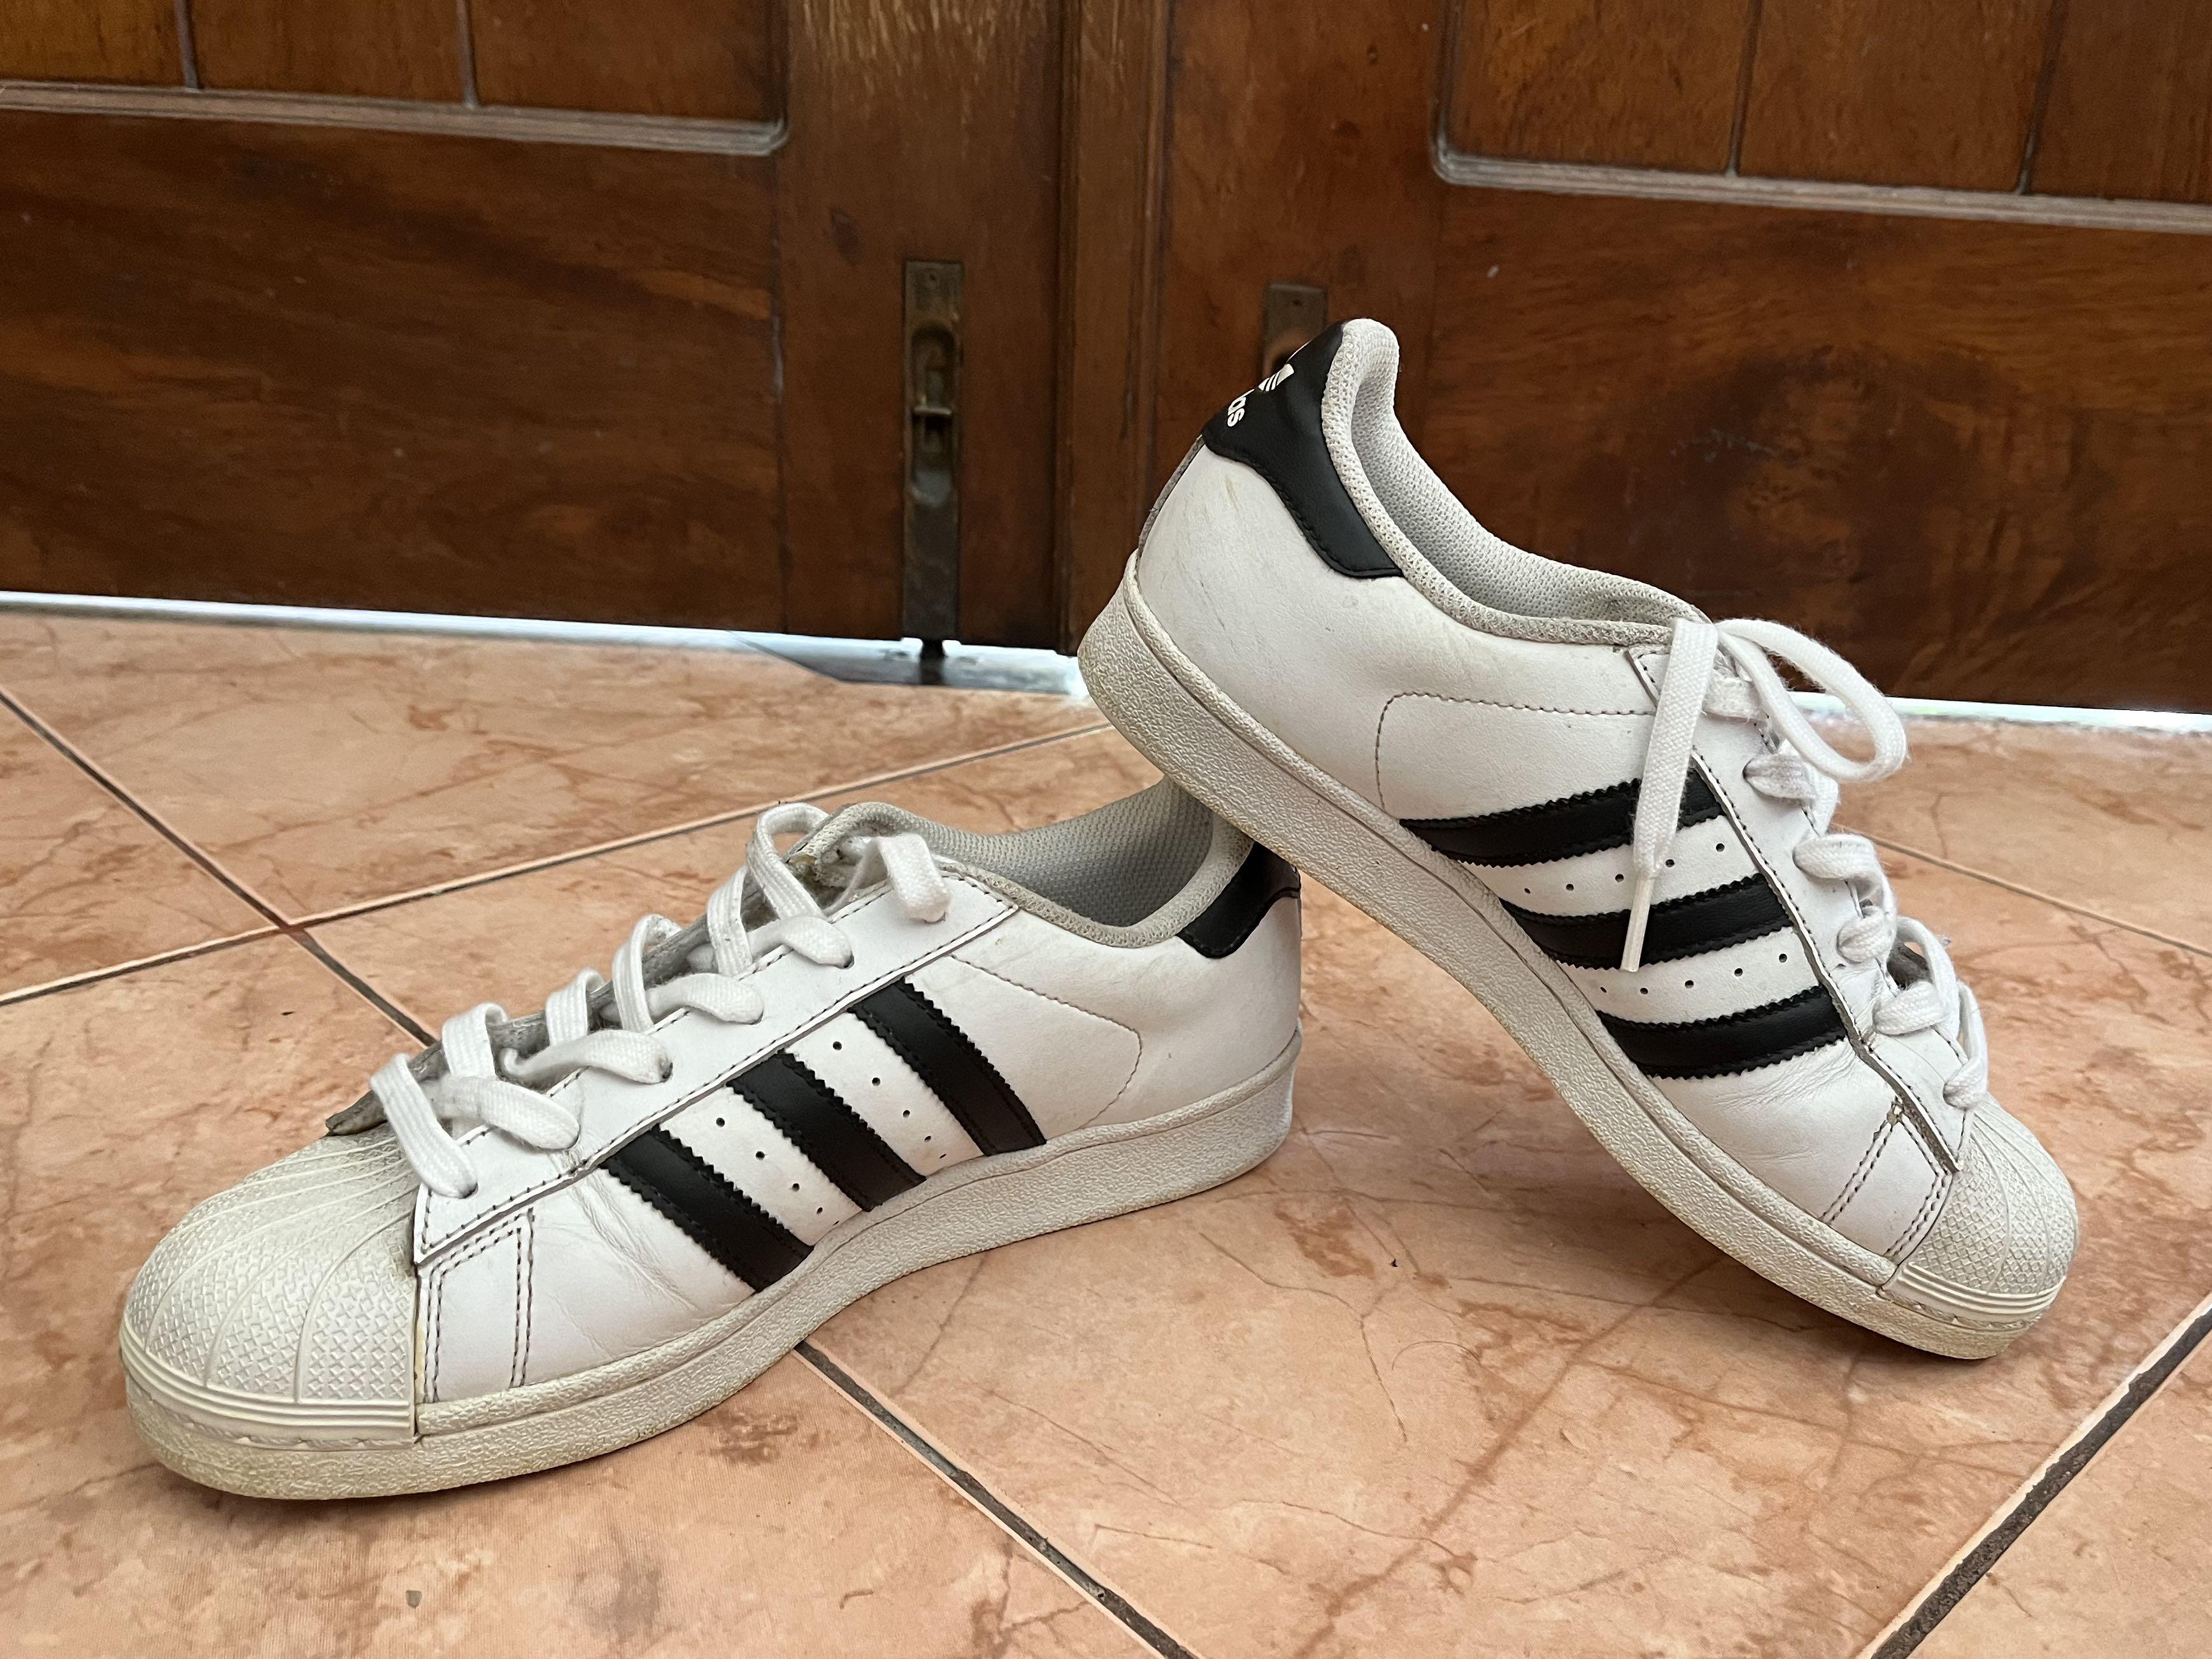 Adidas Superstar Shoes White (Women 5.5), Women's Fashion, Footwear, Sneakers on Carousell